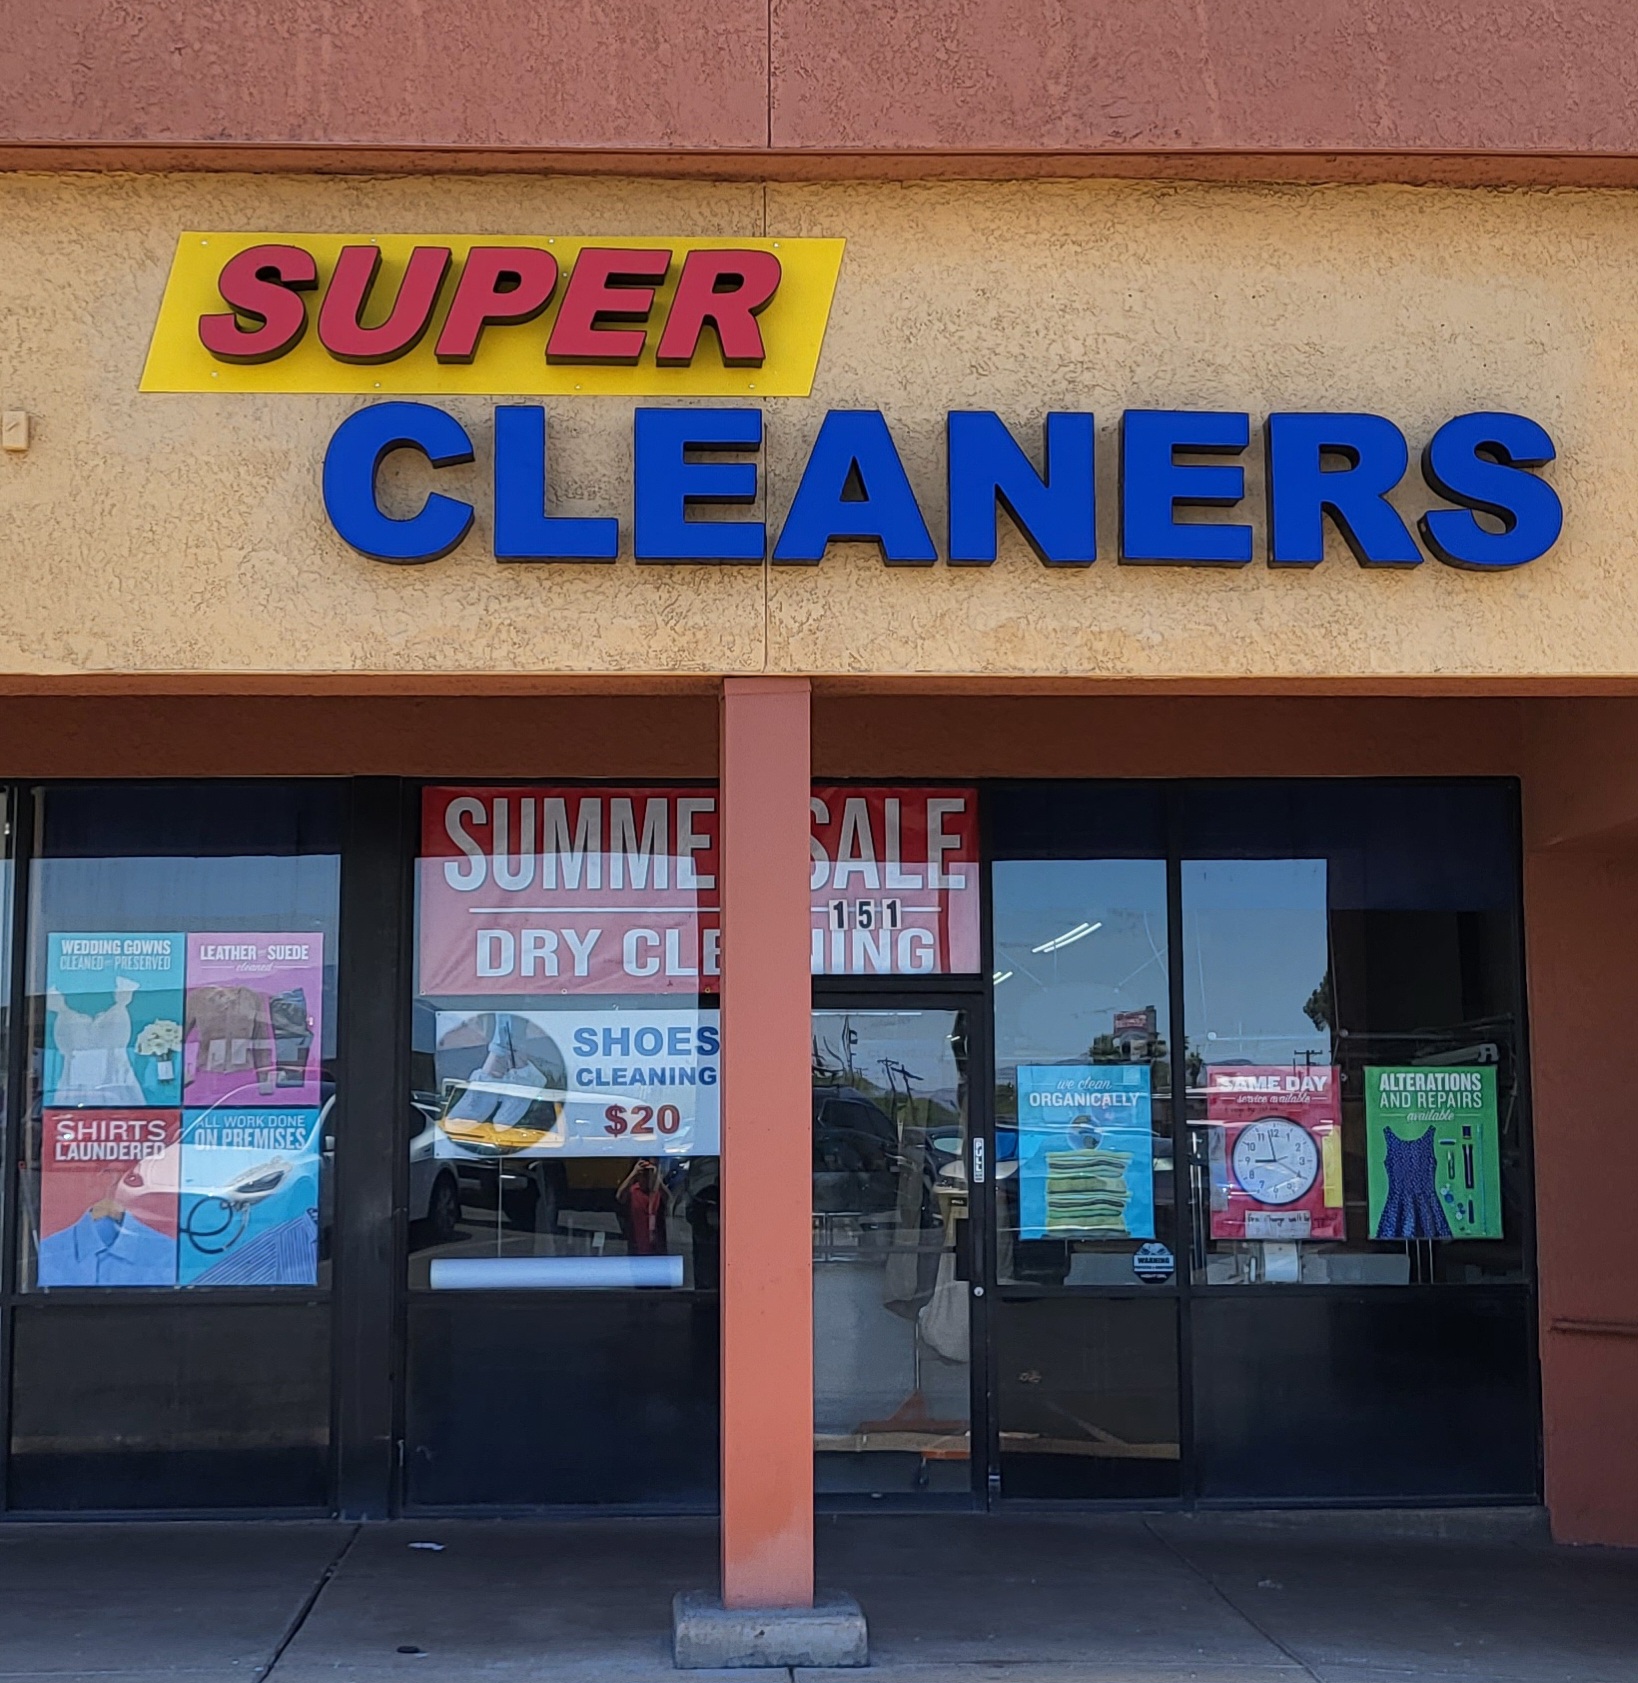 Super Cleaners & Whole Sale